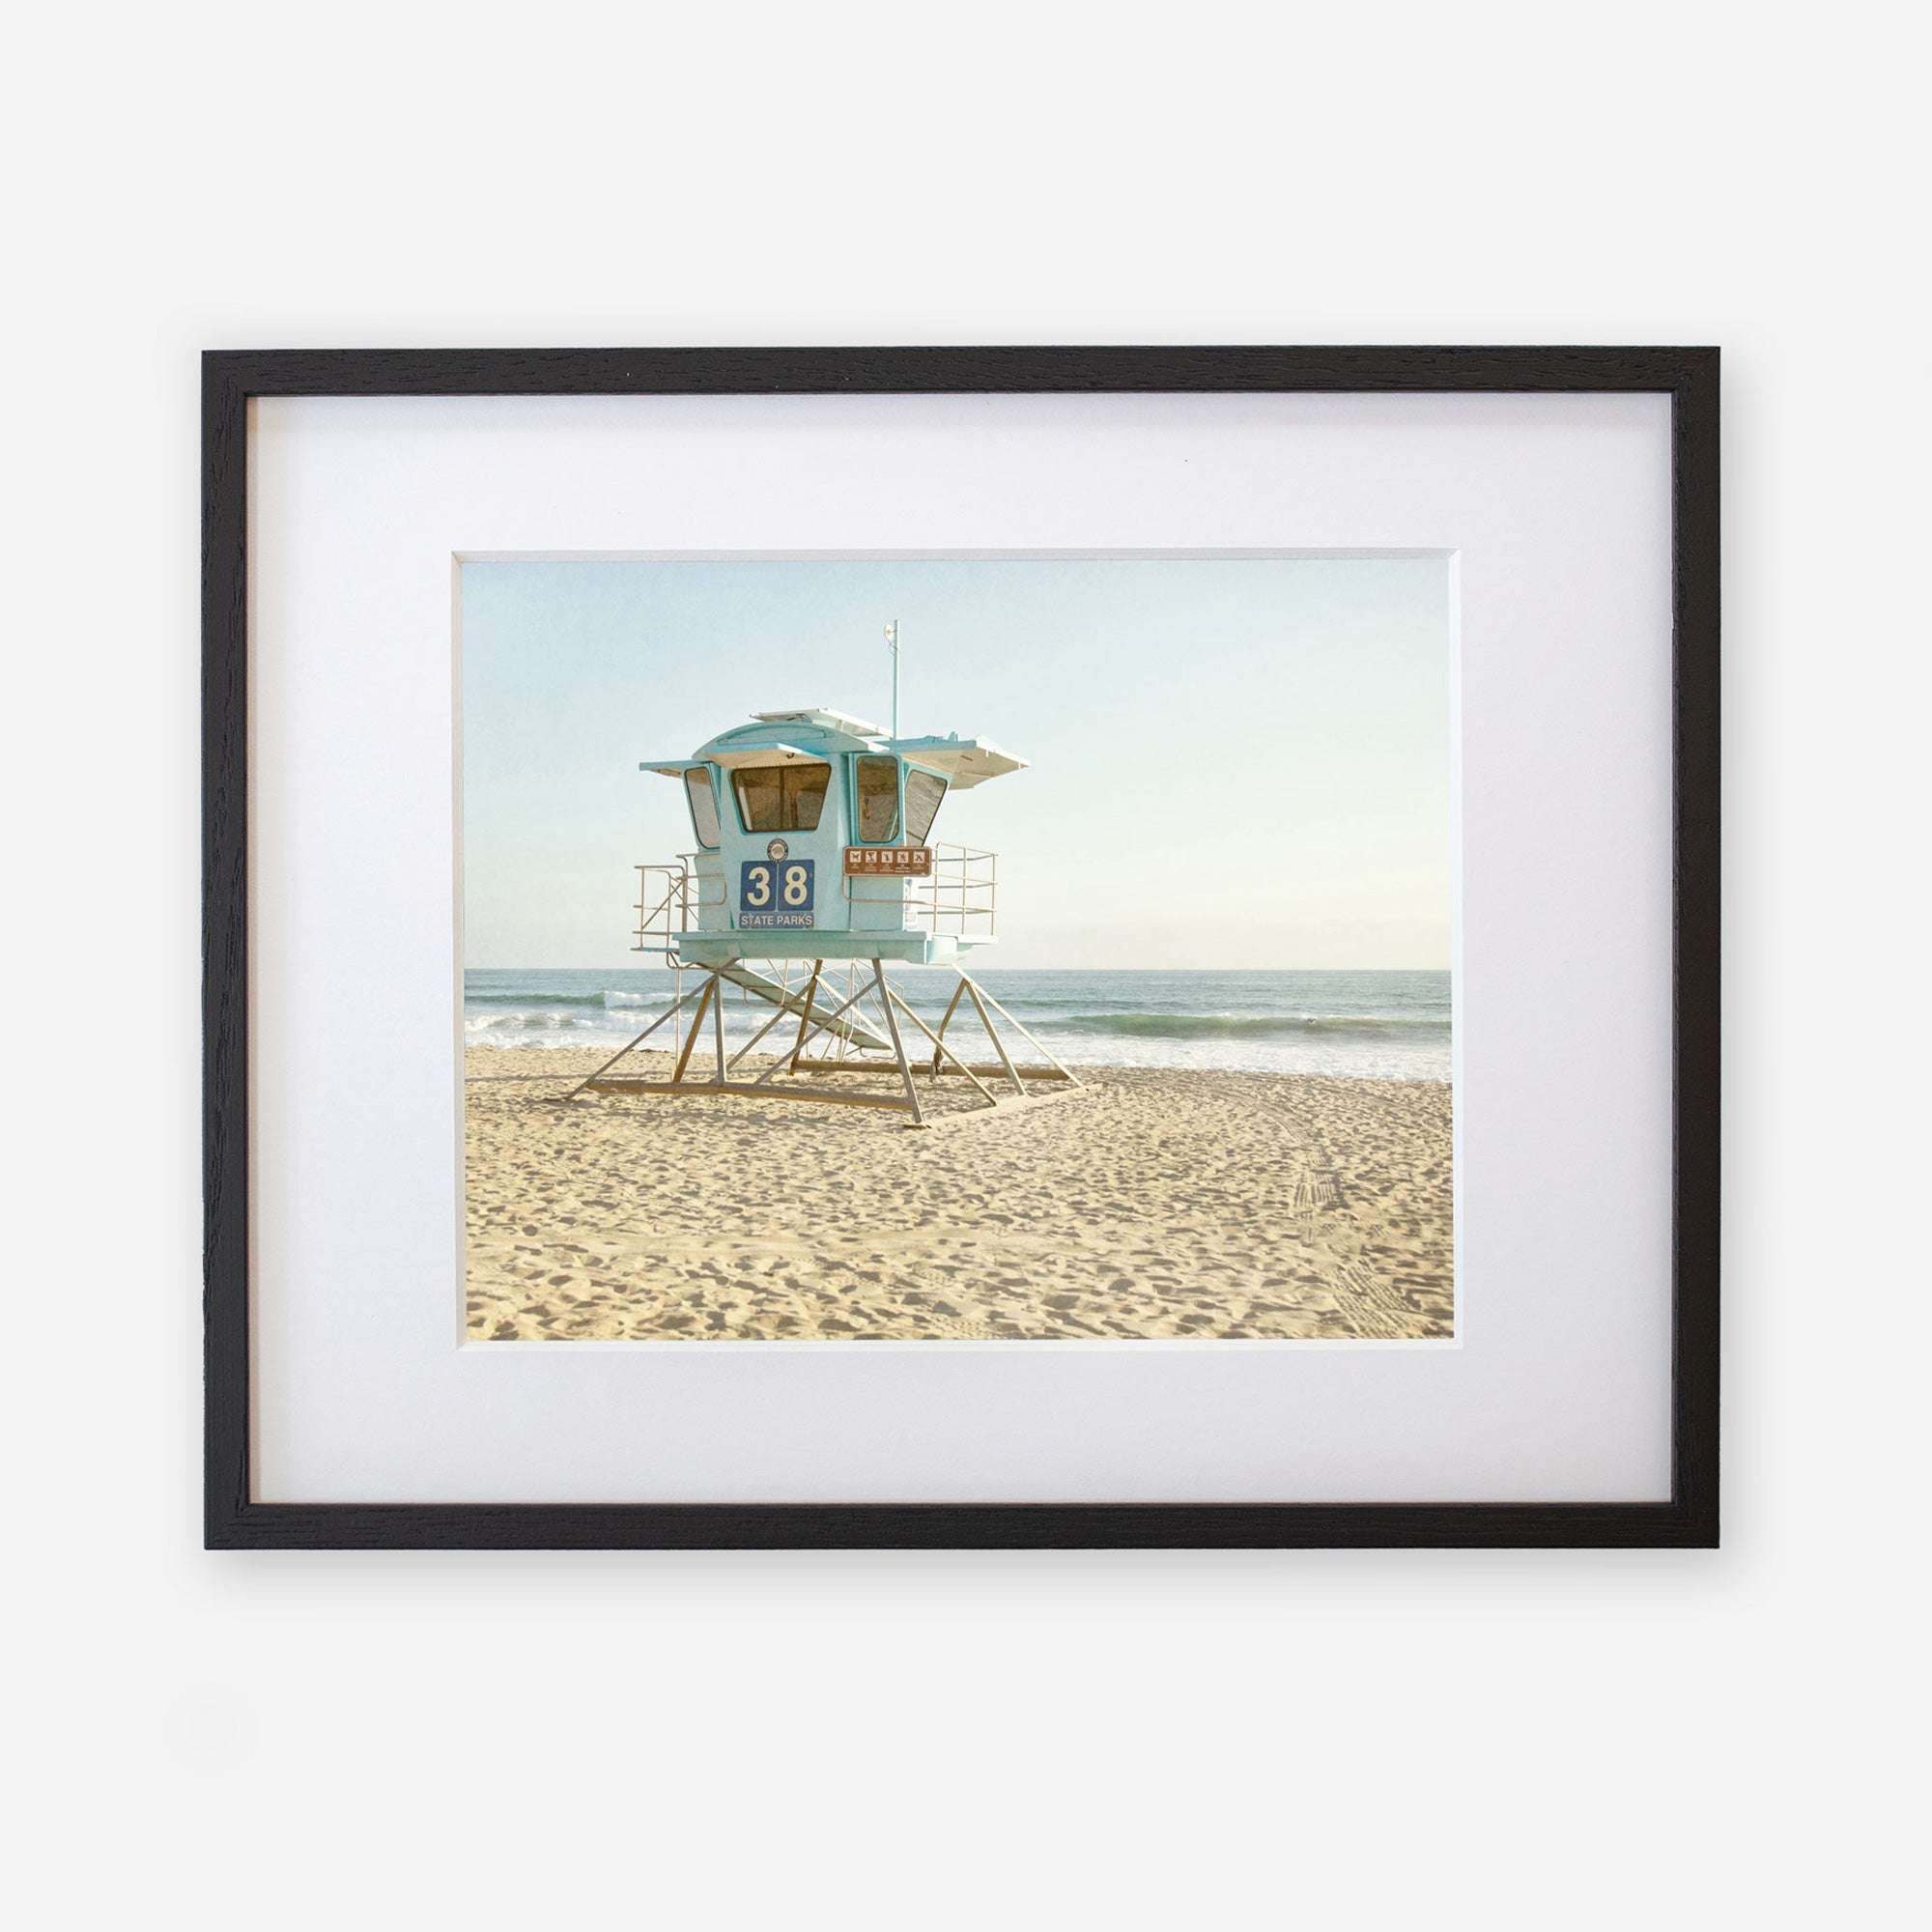 A framed photograph of a California Coastal Print, &#39;Carlsbad Lifeguard Tower&#39; on a sandy beach along the California coastline, with gentle waves in the background under a clear sky by Offley Green.